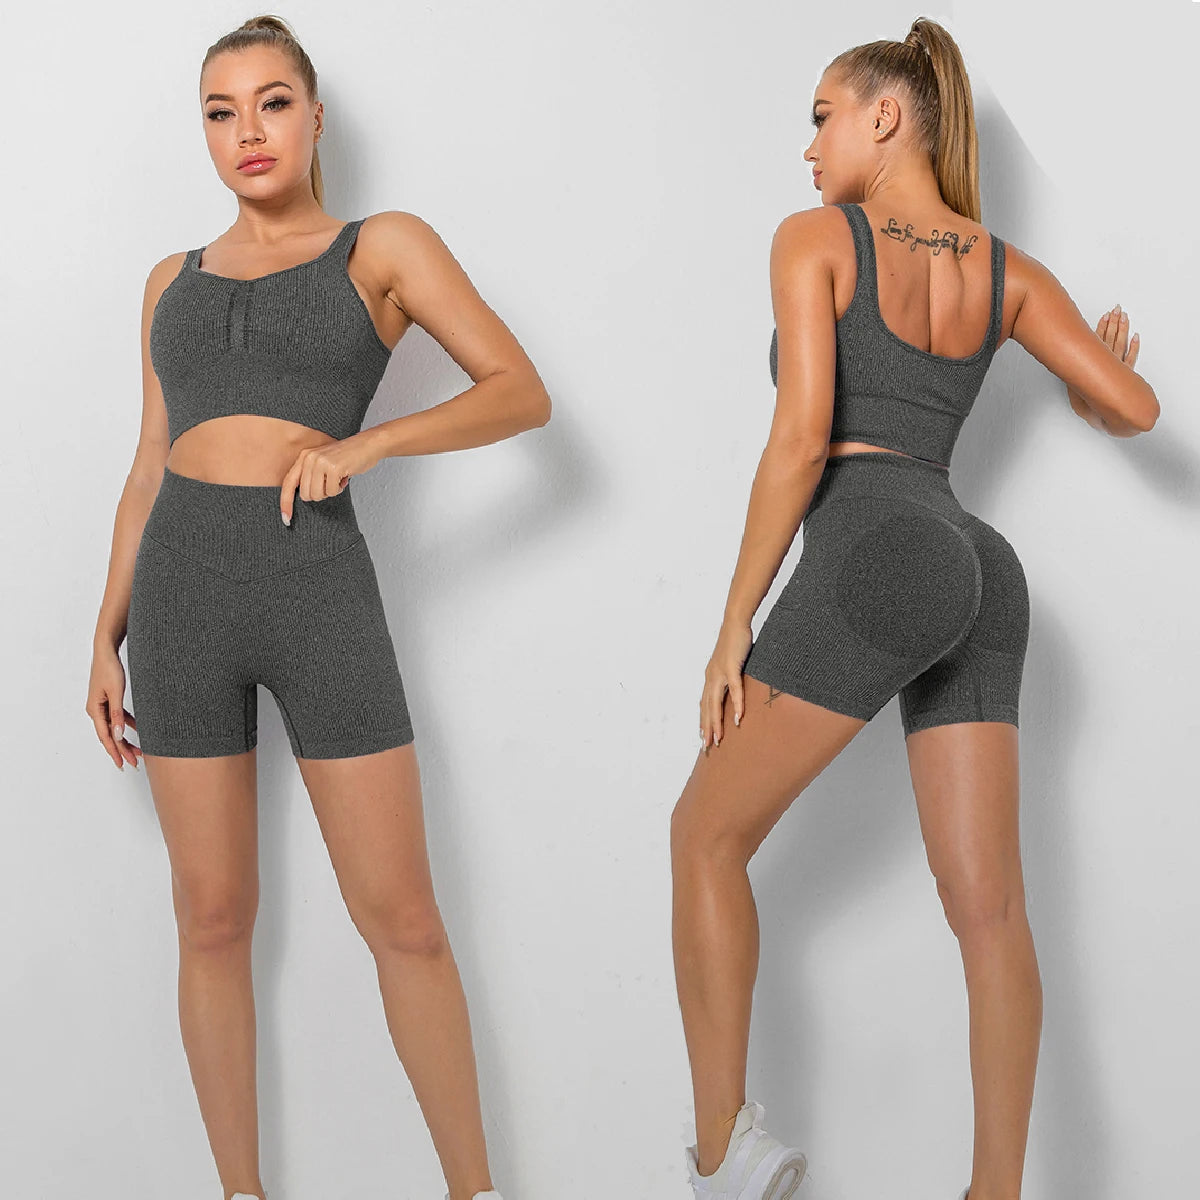 Women Yoga Set Seamless Sport Sportswear High Waist Shorts Leggings Tracksuit Workout Outfits Two Piece Shorts Sets Gym Clothing